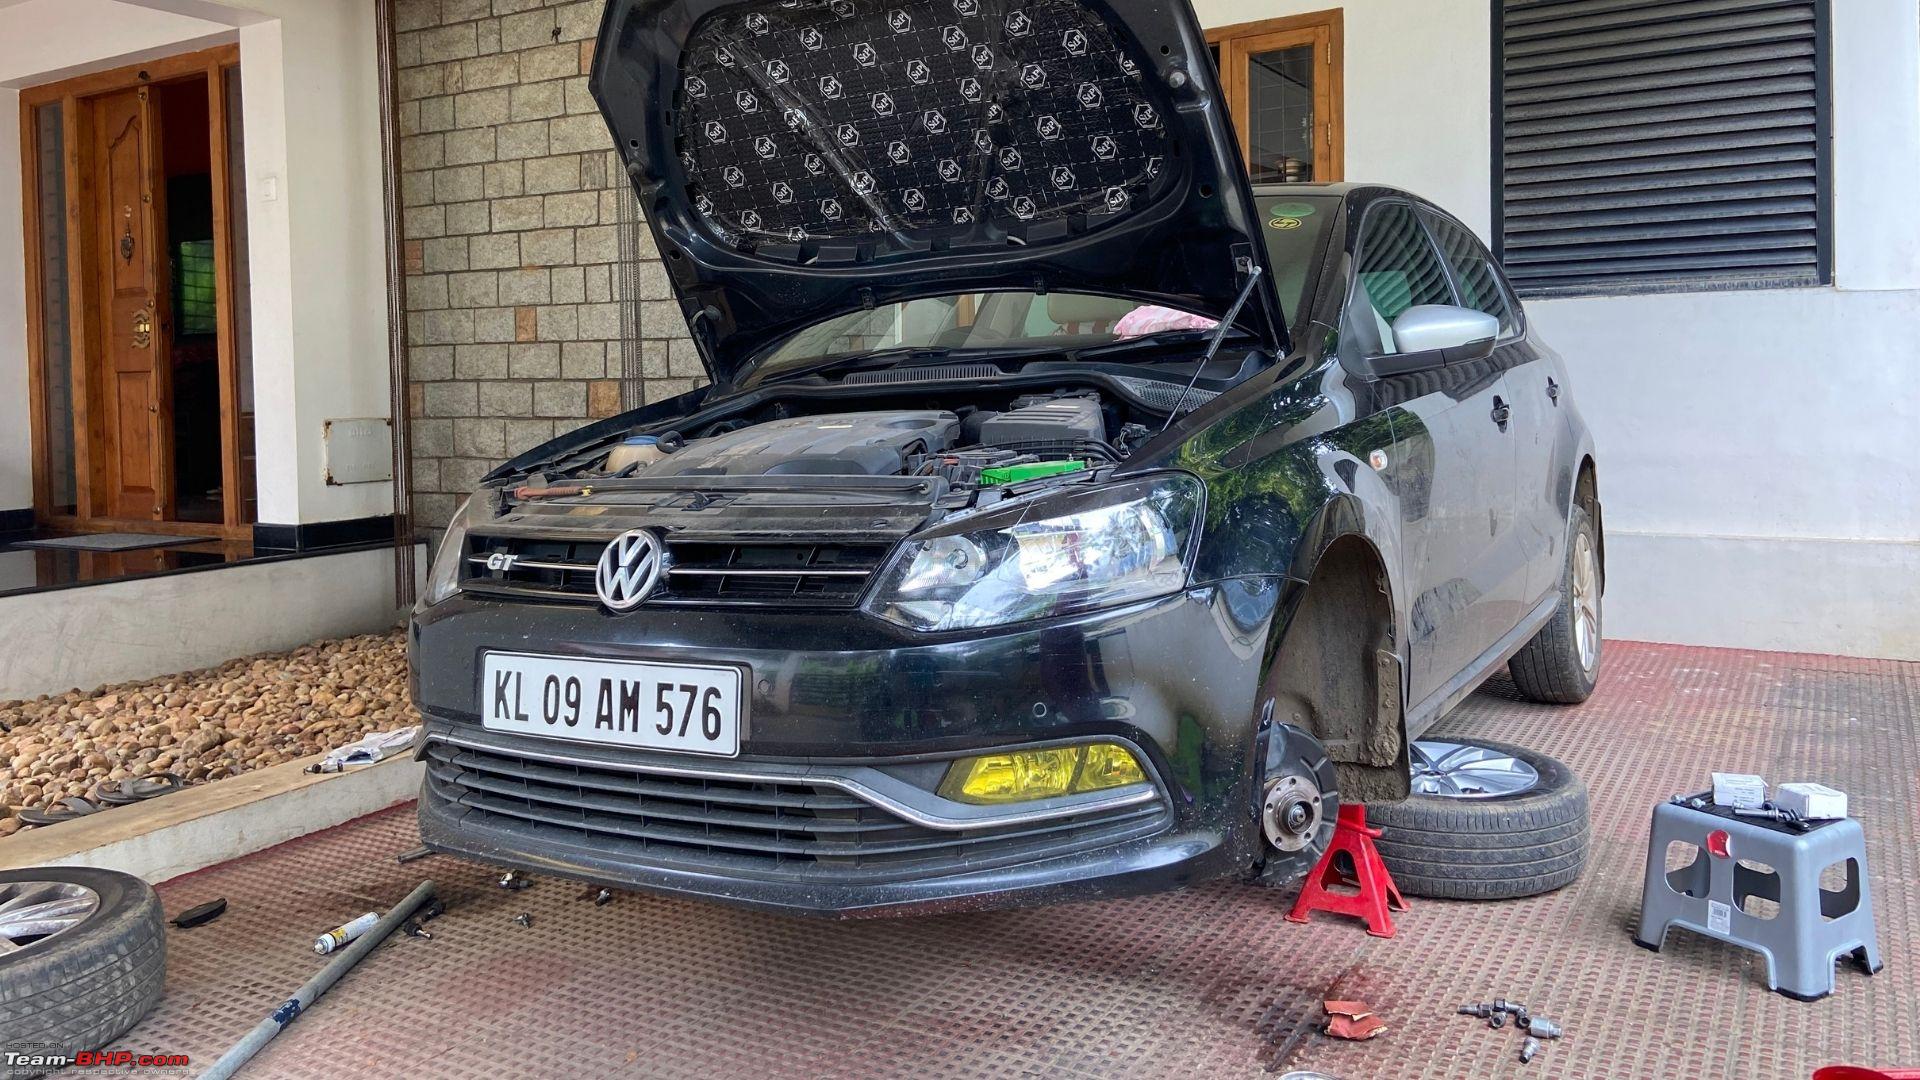 VW Polo DIY: Servicing the front brakes (FN 3 brake system) - Team-BHP